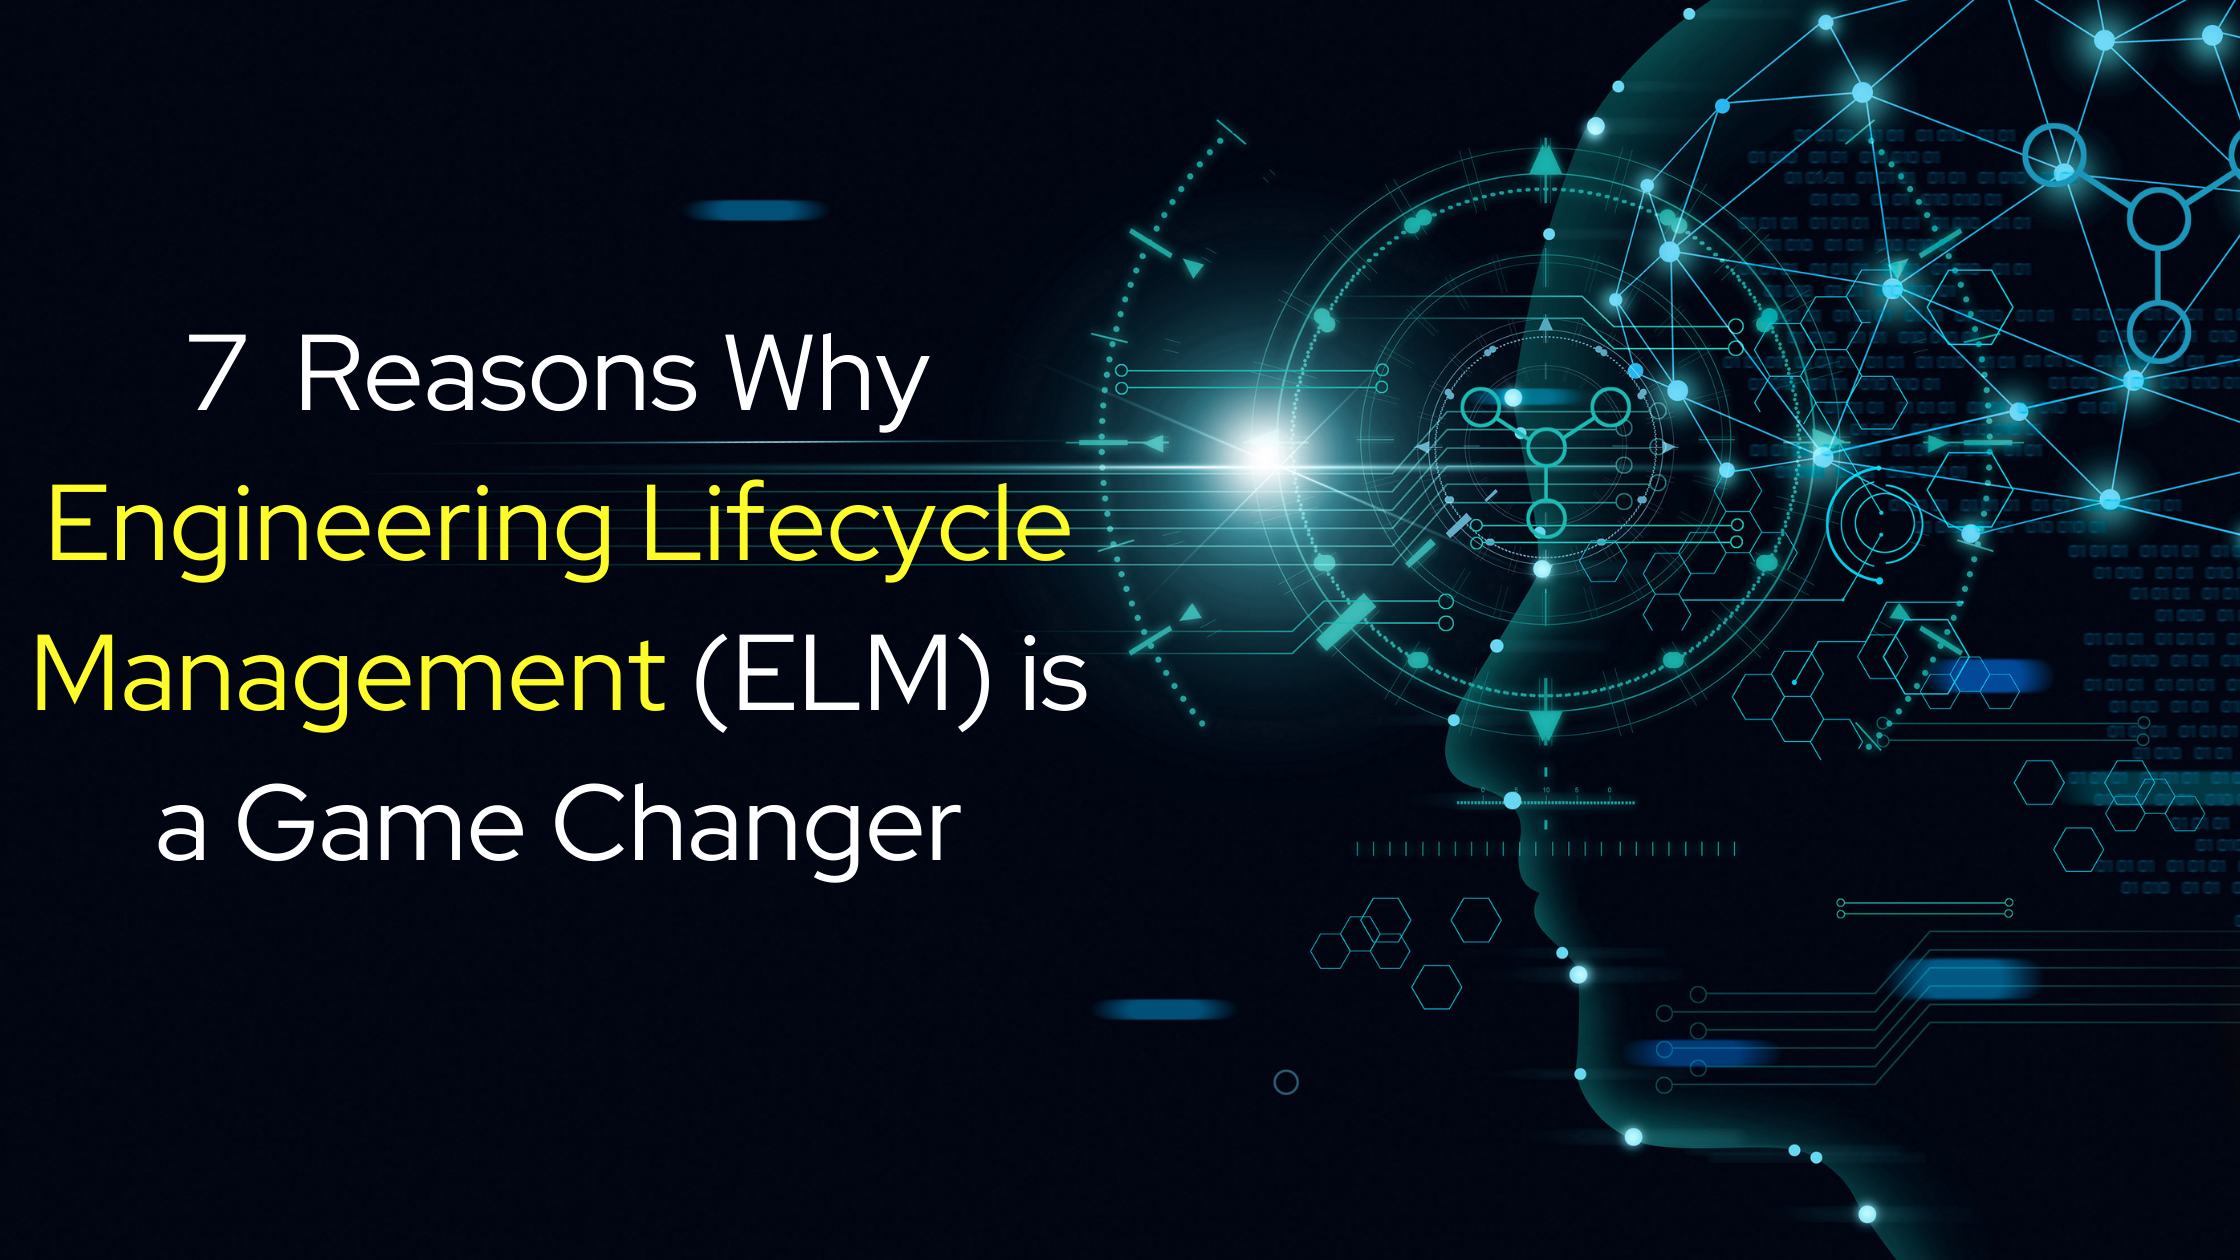 Seven Reasons Why Engineering Lifecycle Management (ELM) is a Game Changer